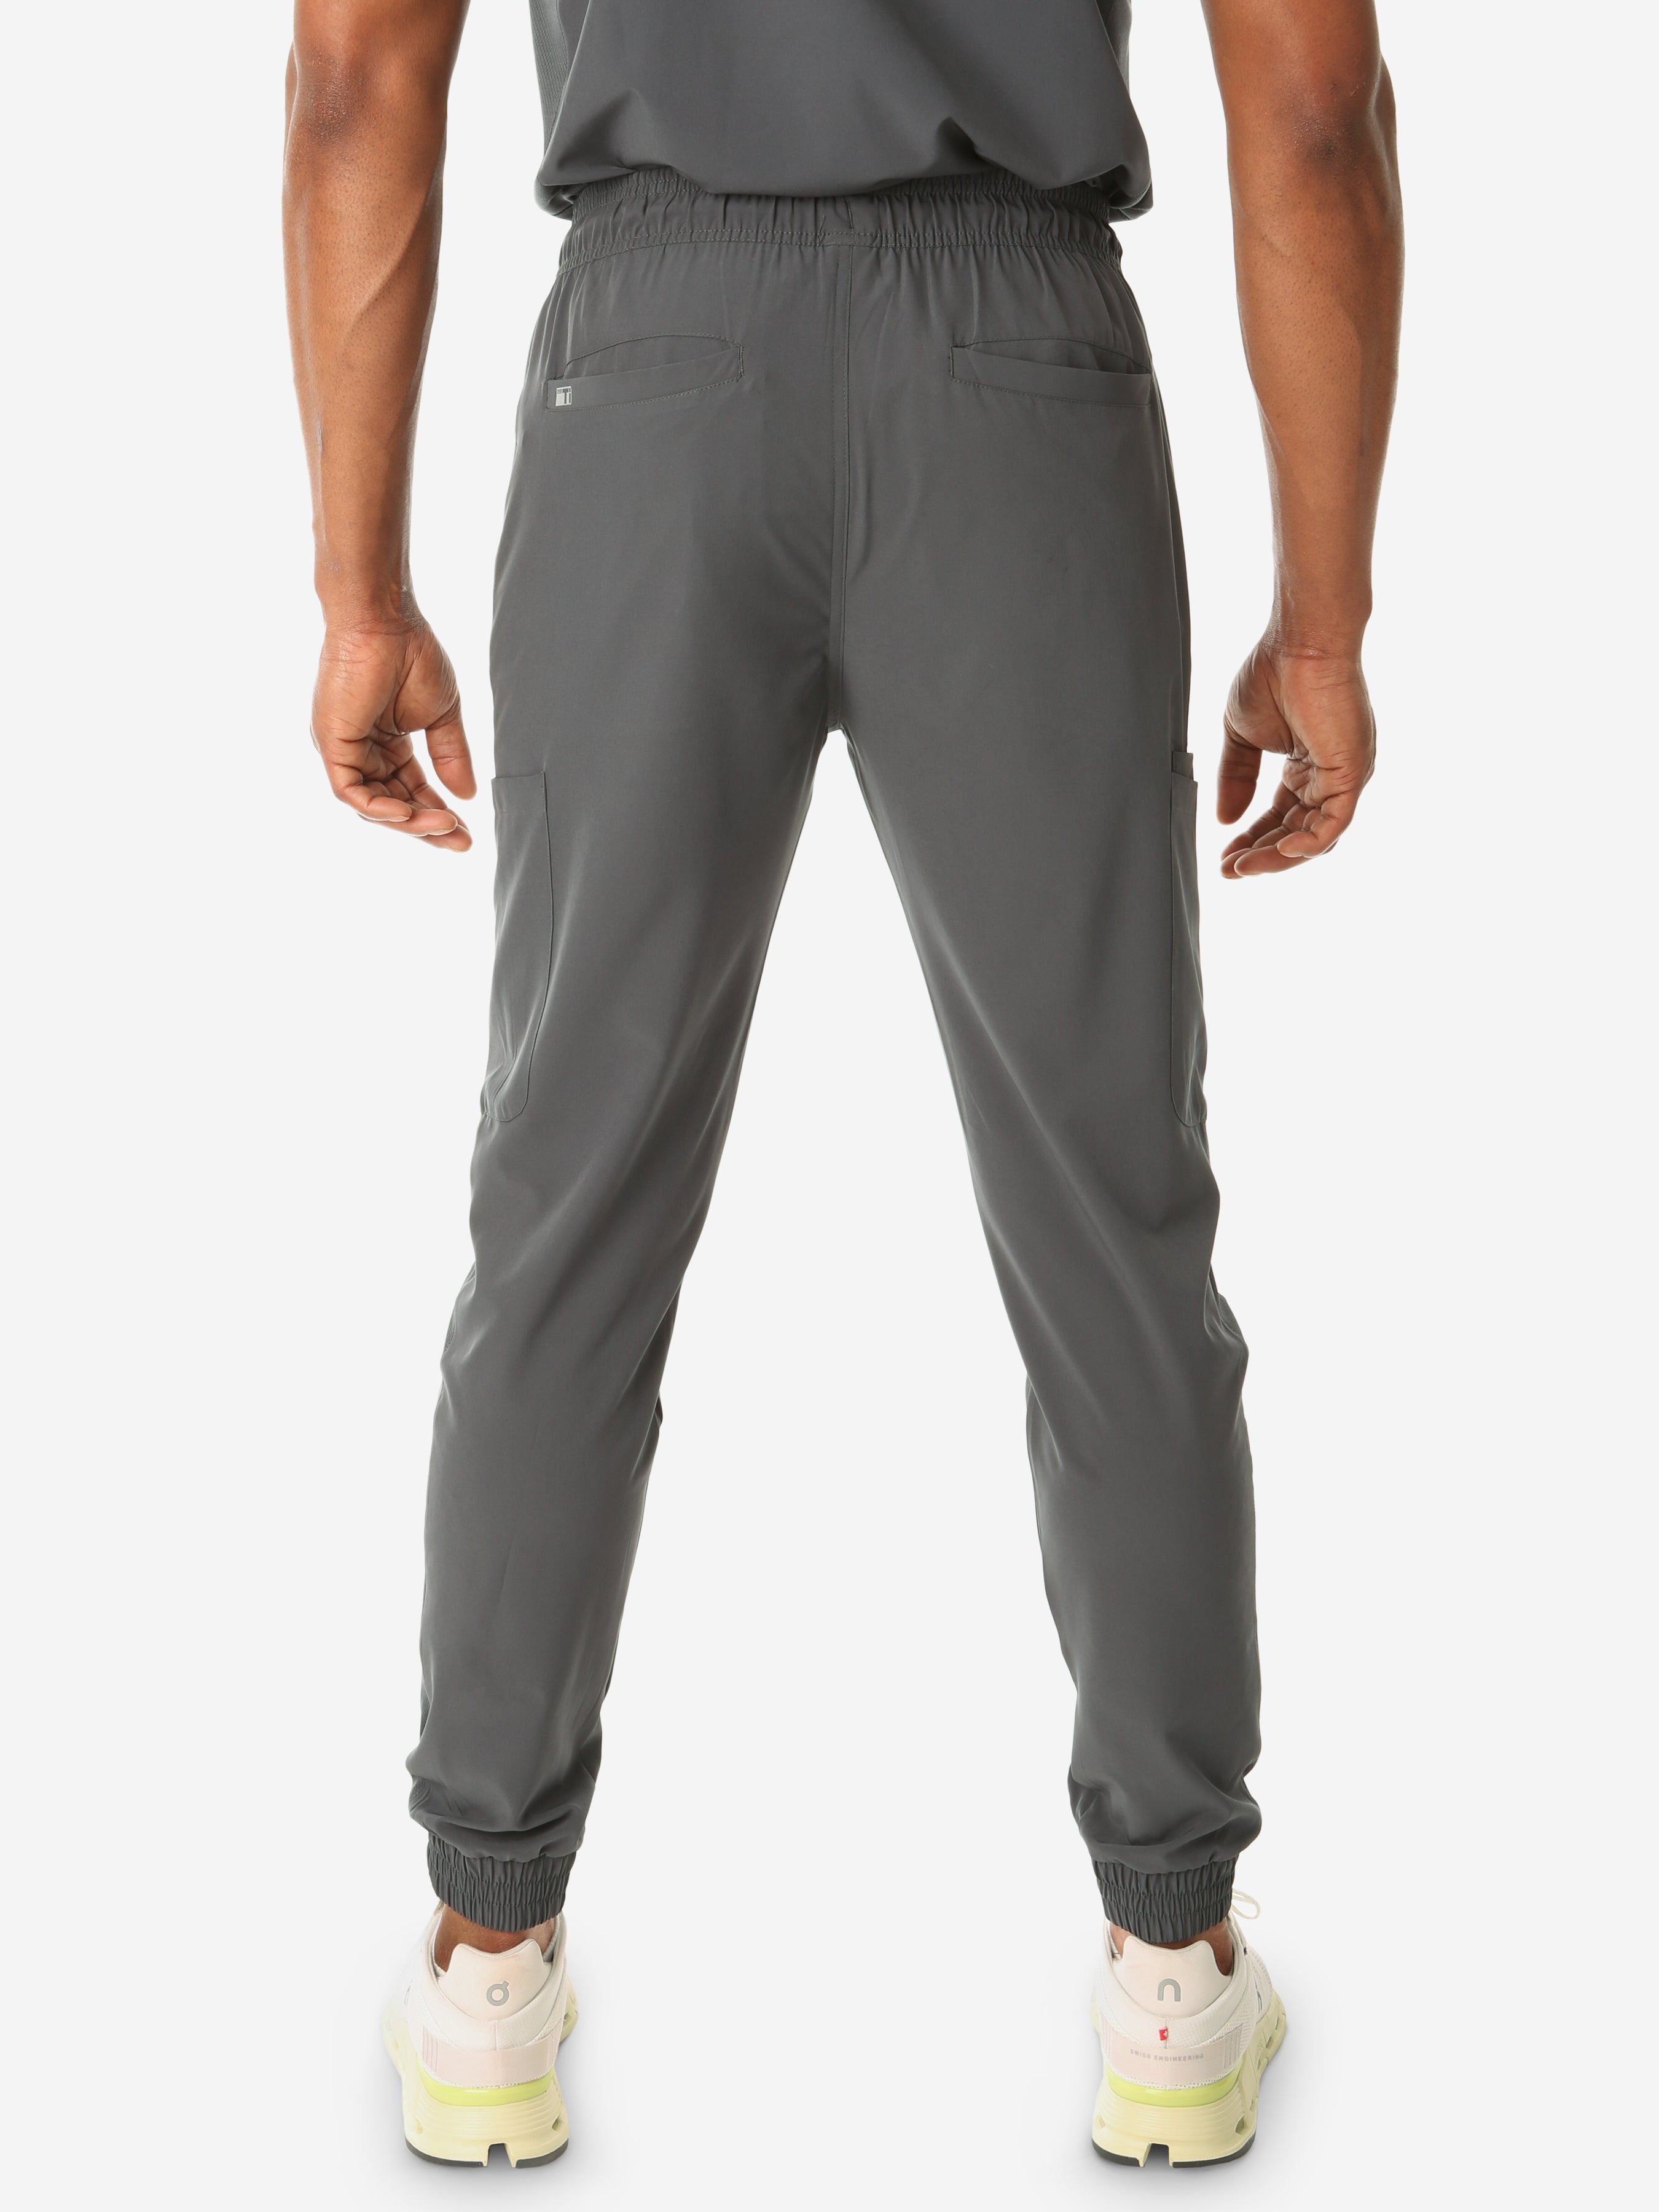 TiScrubs Stretch Charcoal Gray Men's Jogger Scrub Pants and Pants Only Back